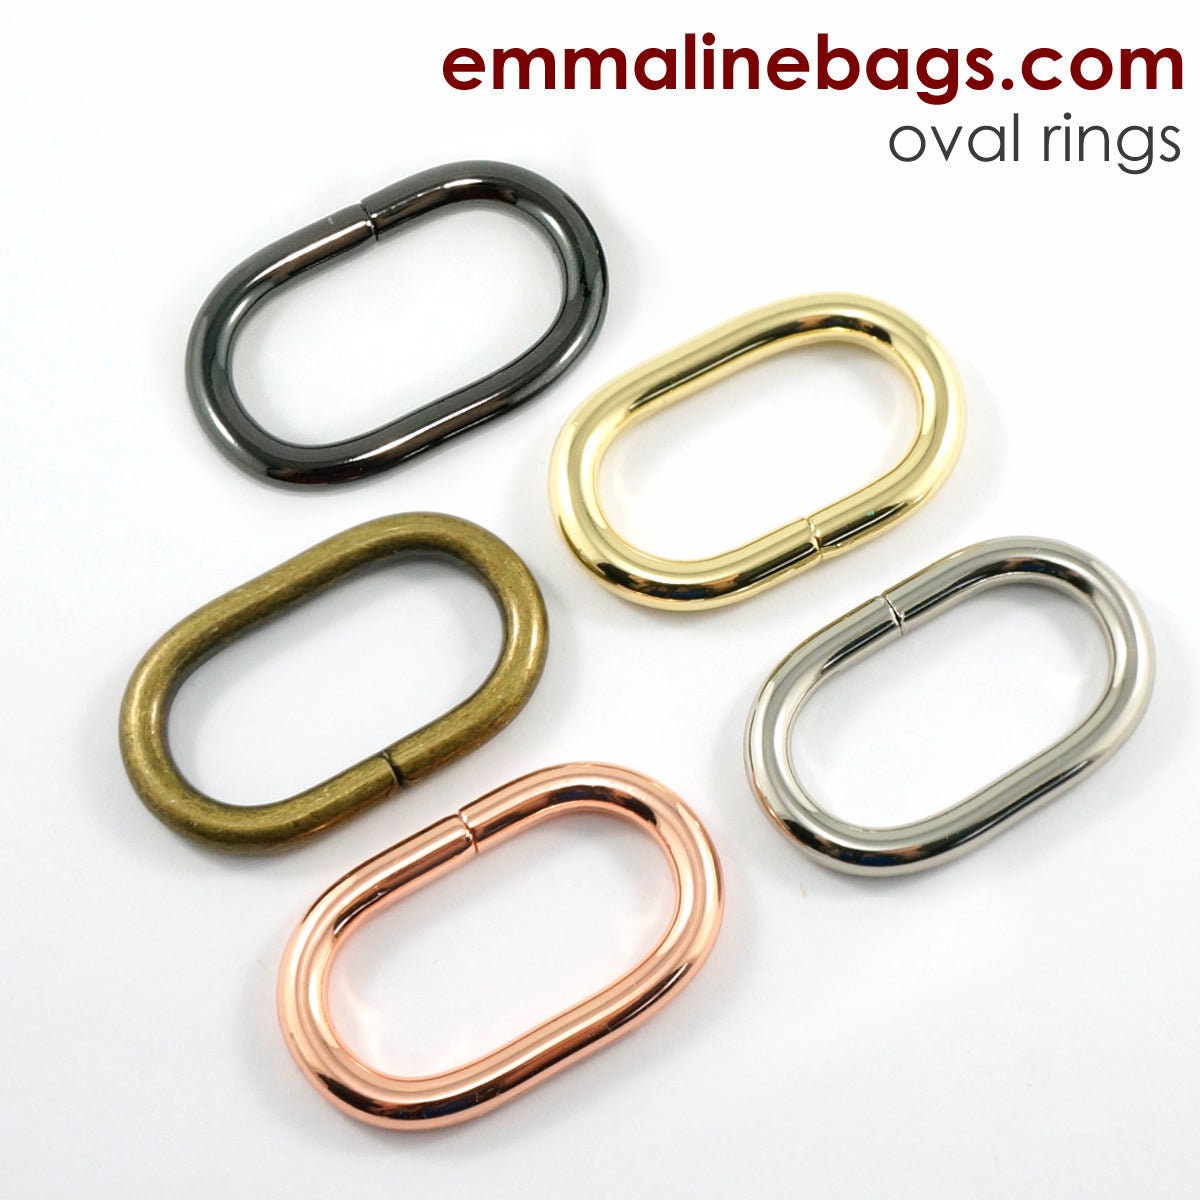 1-1/4" Oval Strap Rings (34mm) - Pack of 4